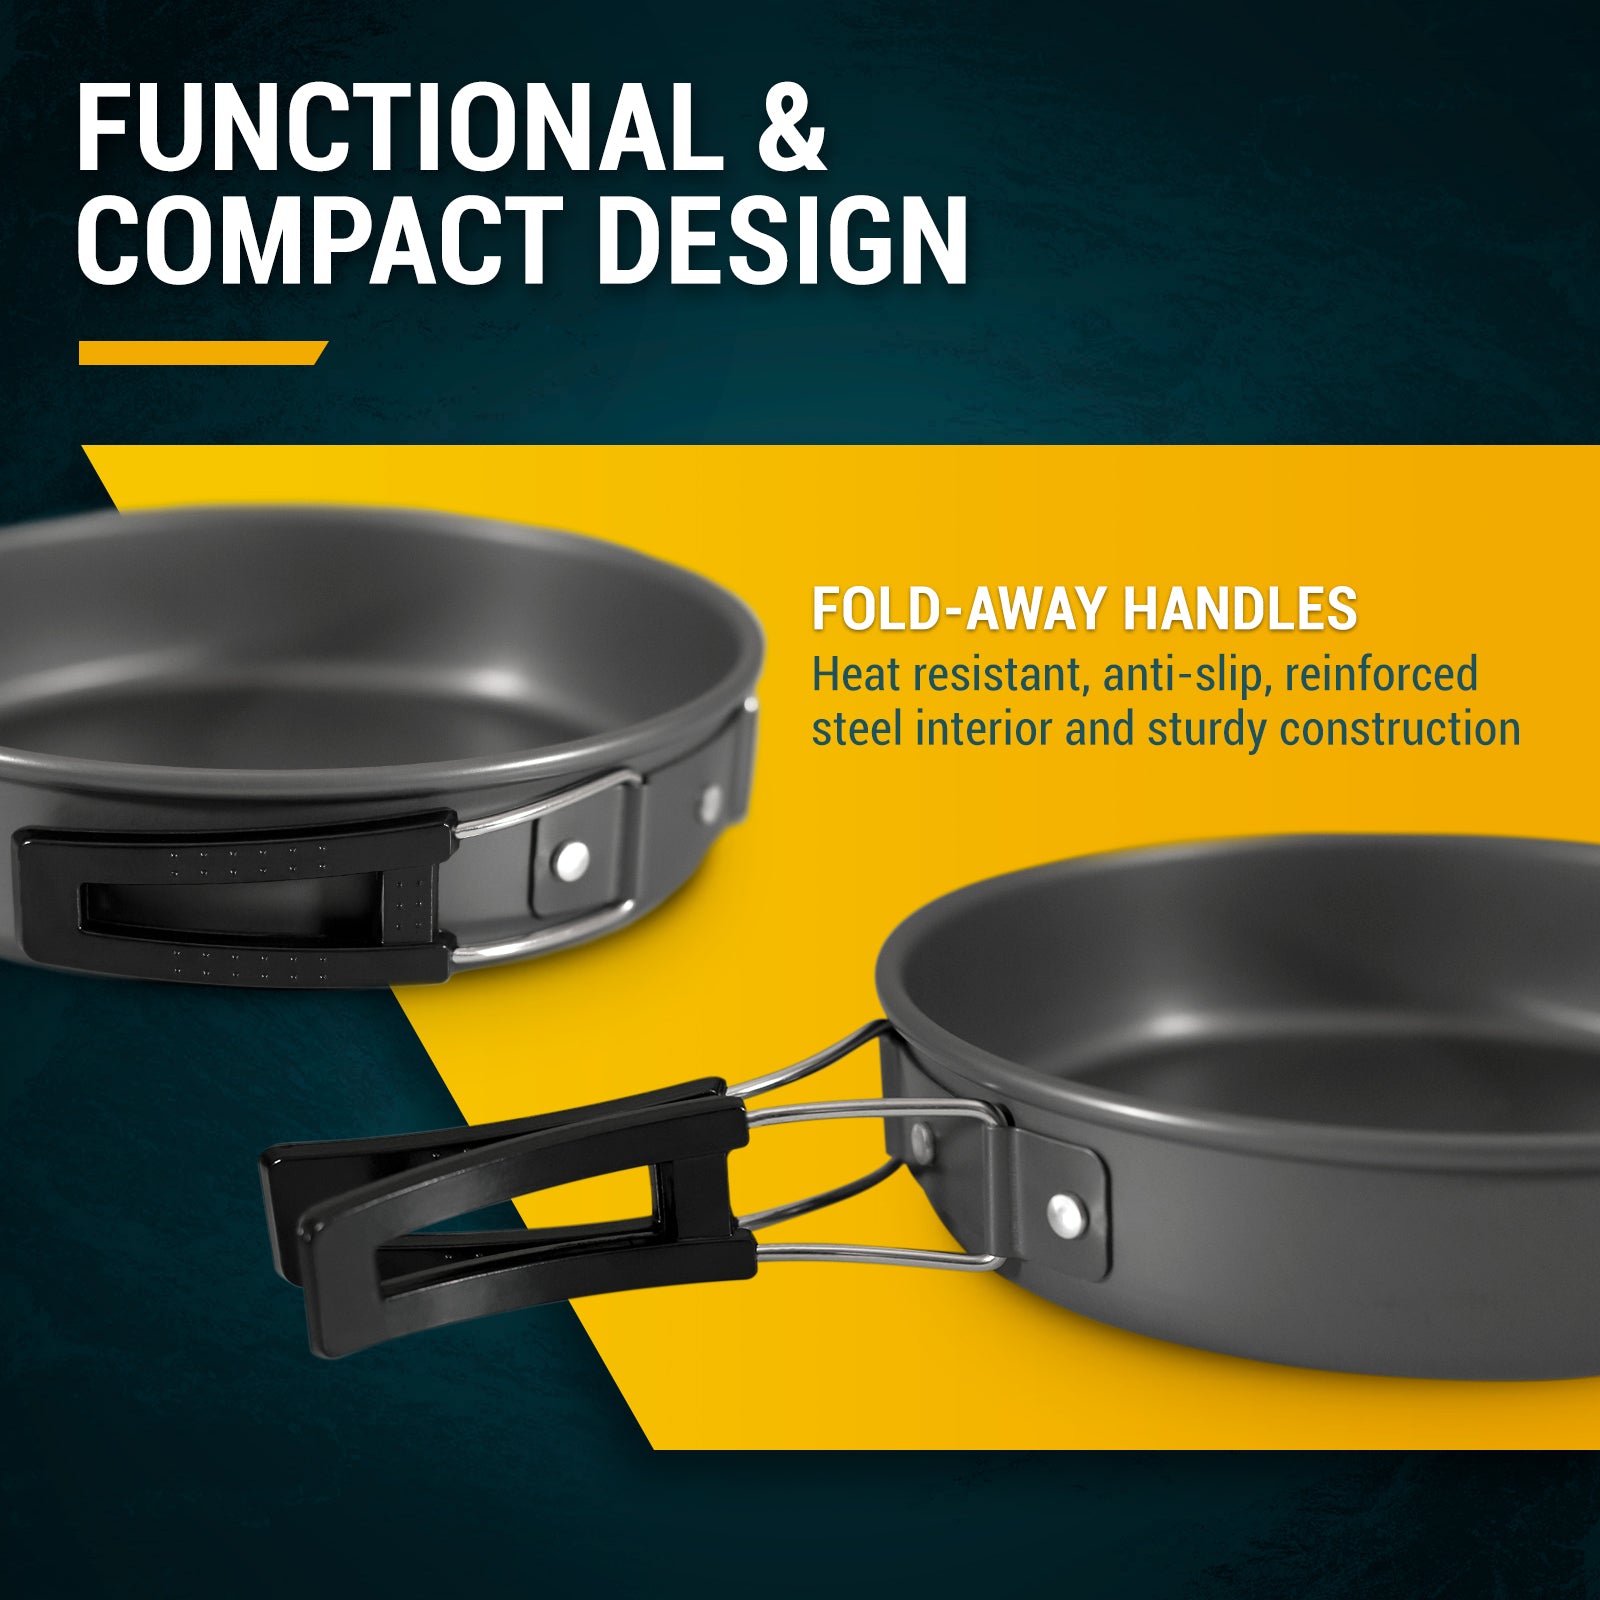 Winterial Camping Cookware and Pot Set